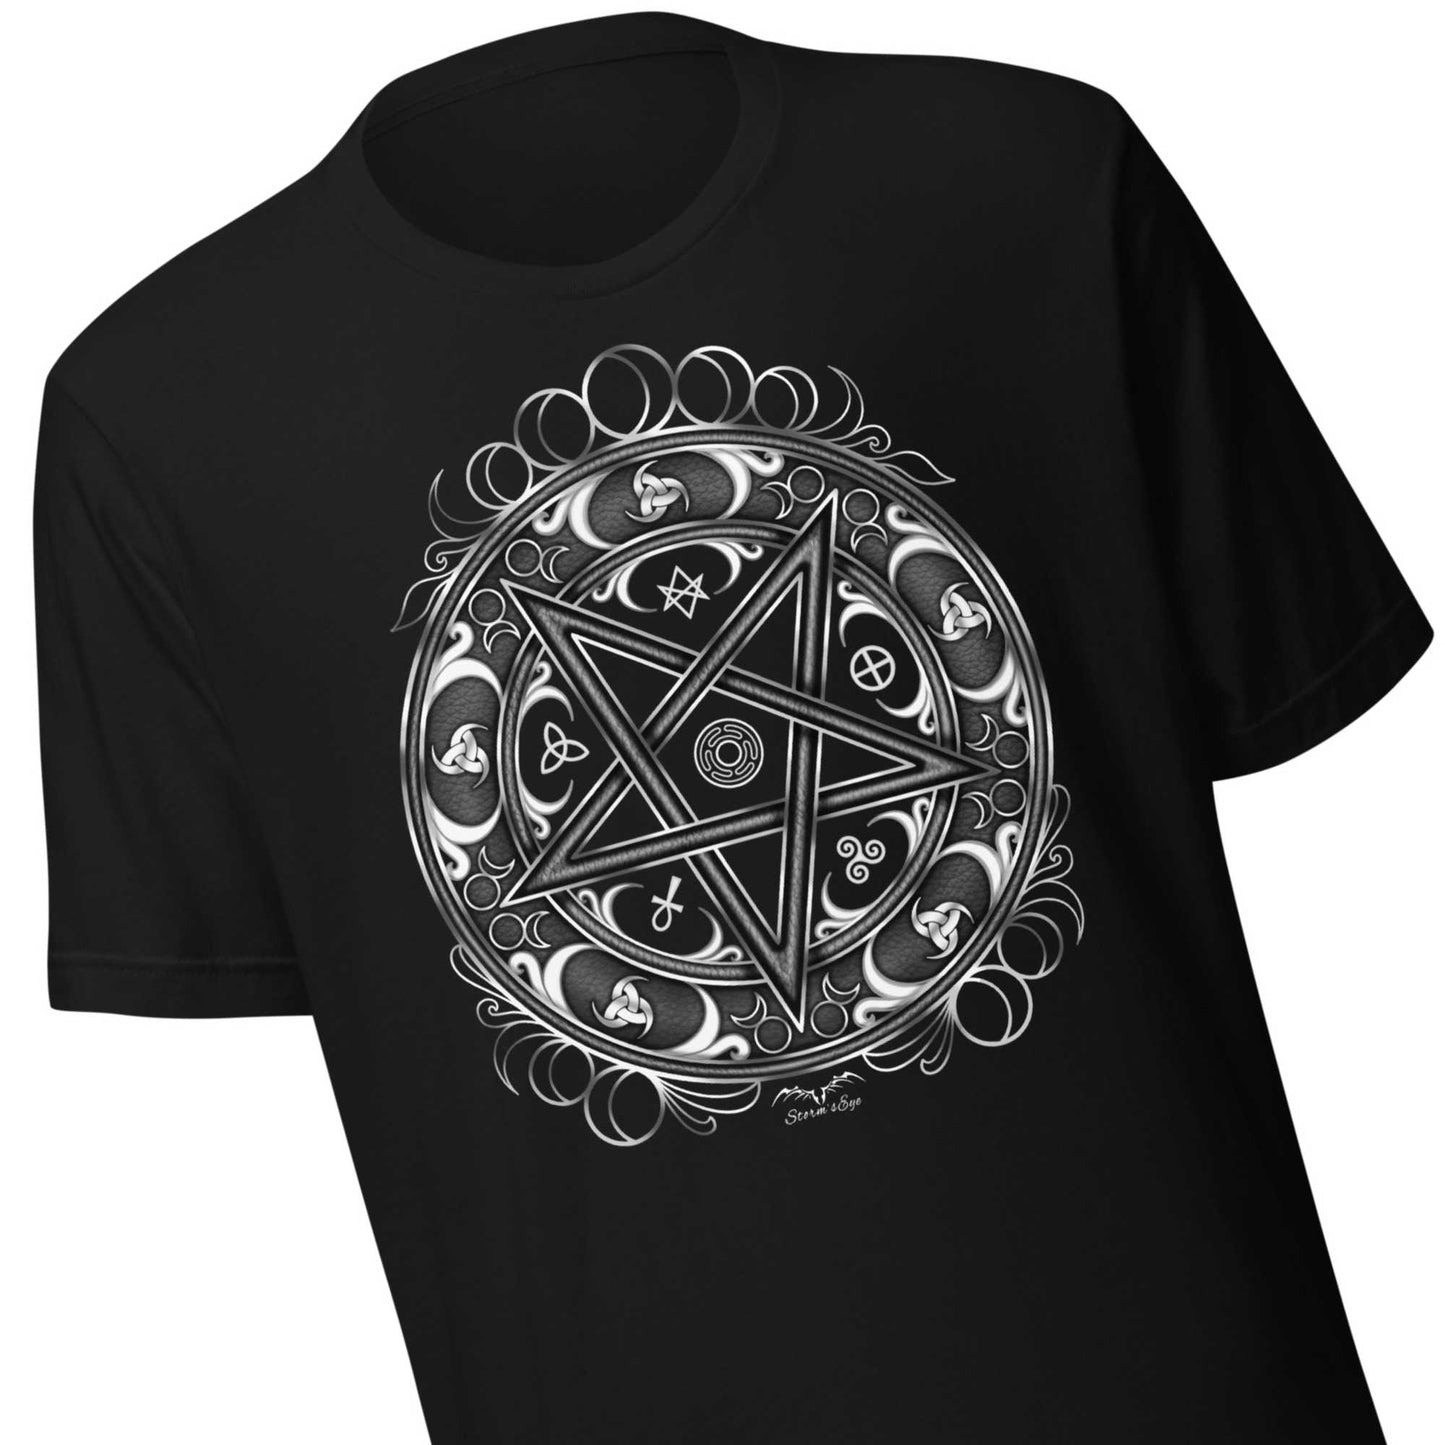 stormseye design witchy occult wheel T shirt, detail view black